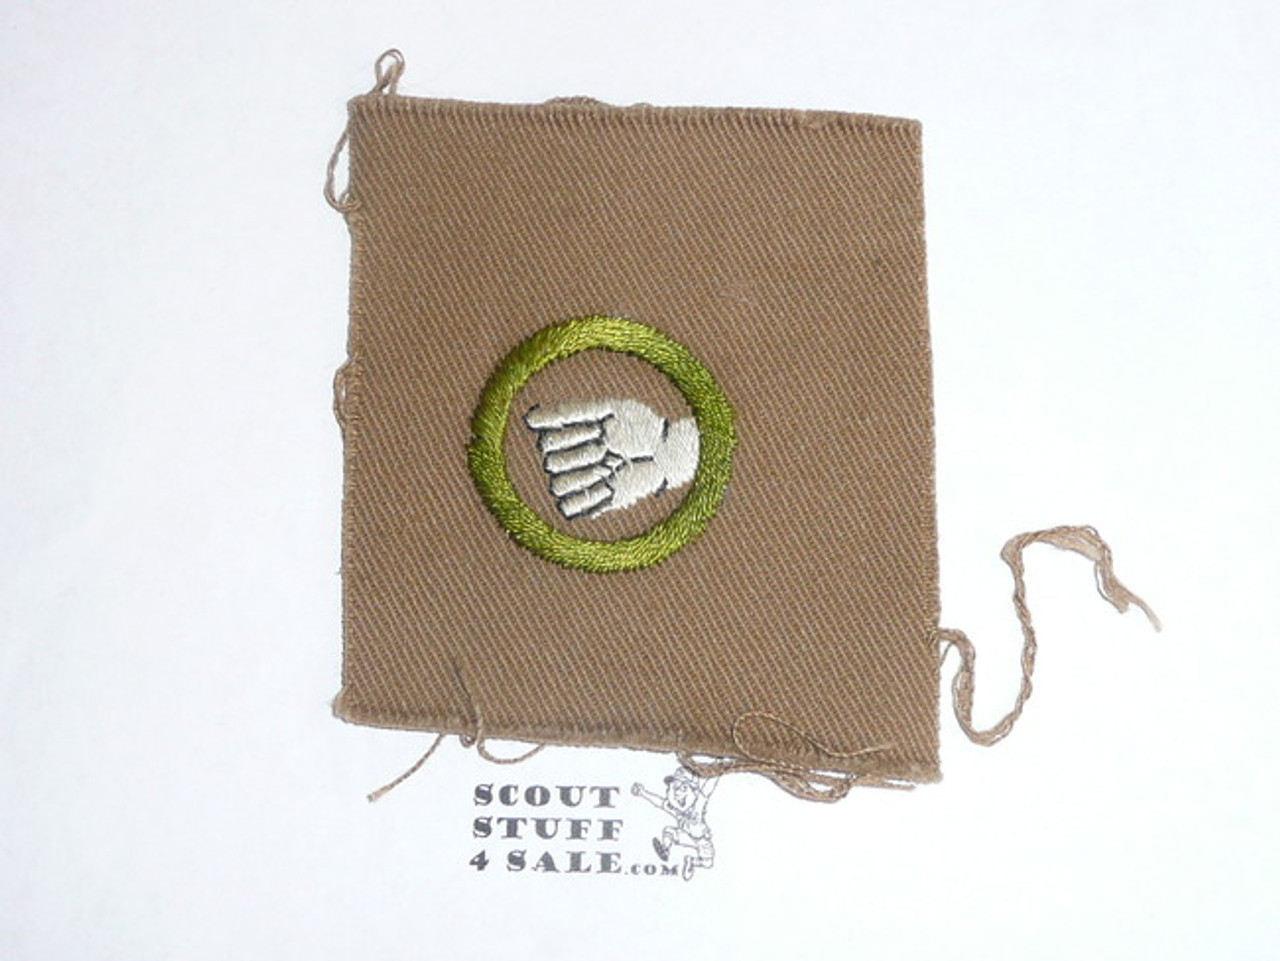 Physical Development - Type A - Square Tan Merit Badge (1911-1933), TEENS extended thumb, huge piece of cloth, black striped back